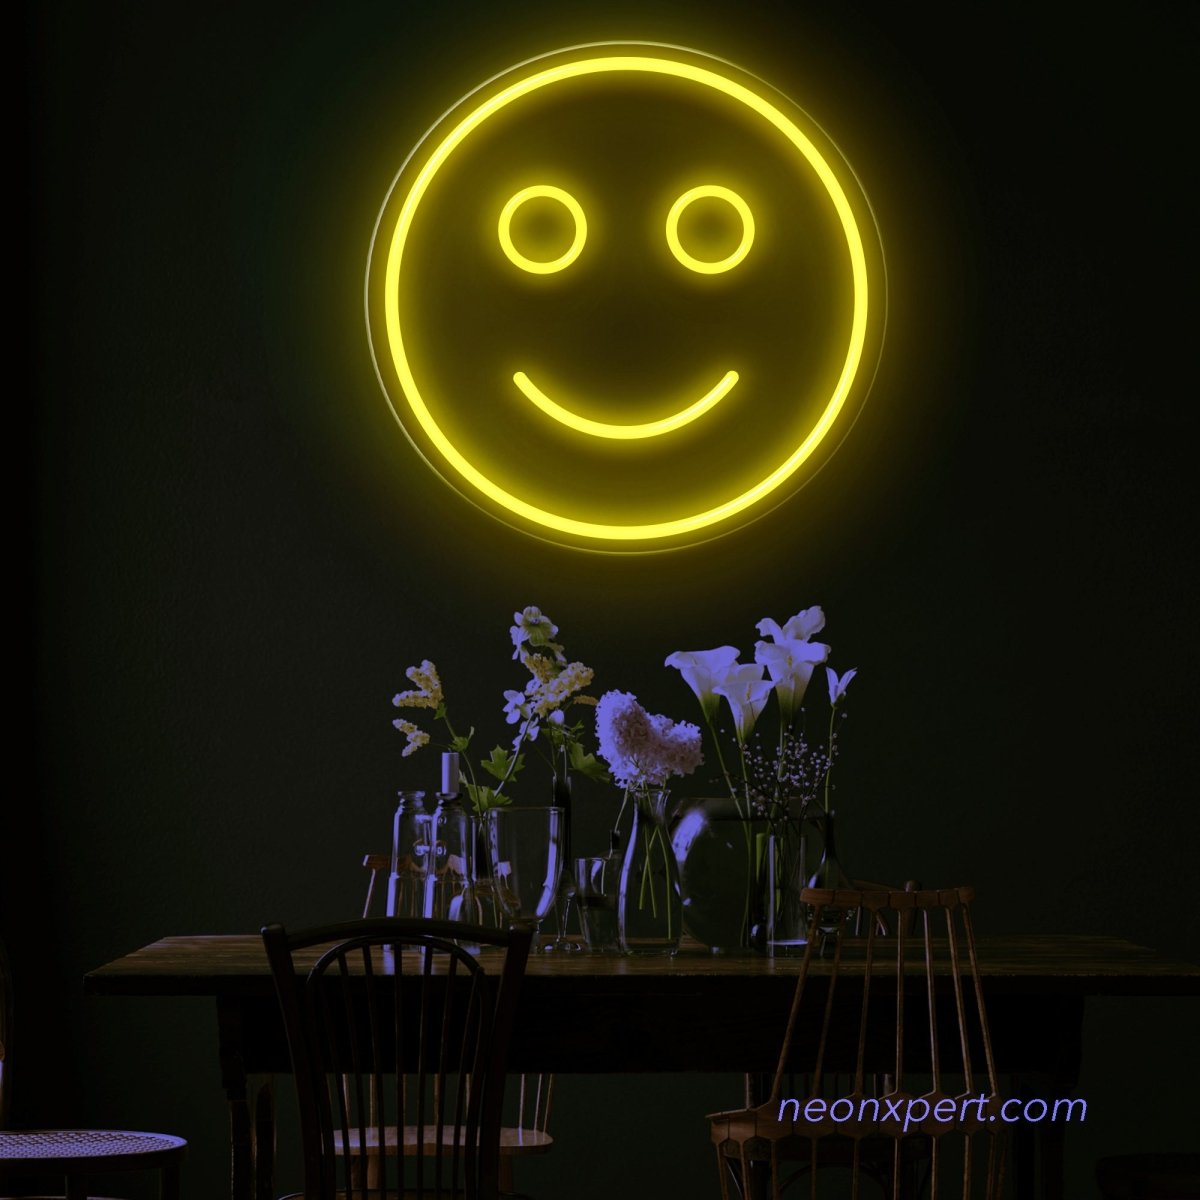 Smiley Face Neon Sign - NeonXpert